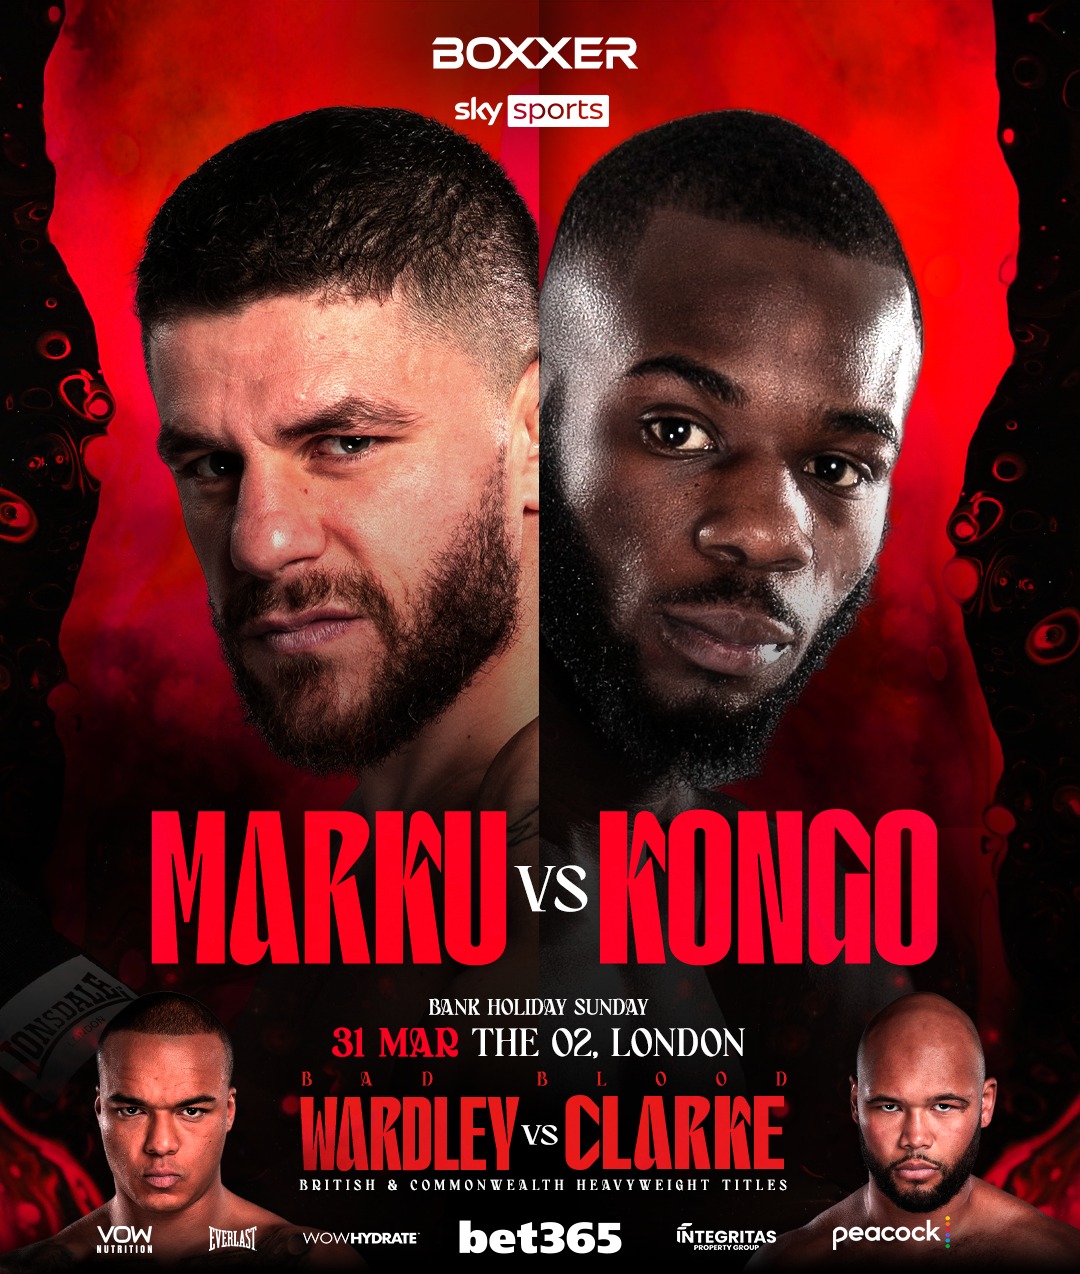 Marku-Kongo Confirmed For 'Bad Blood' On March 31st